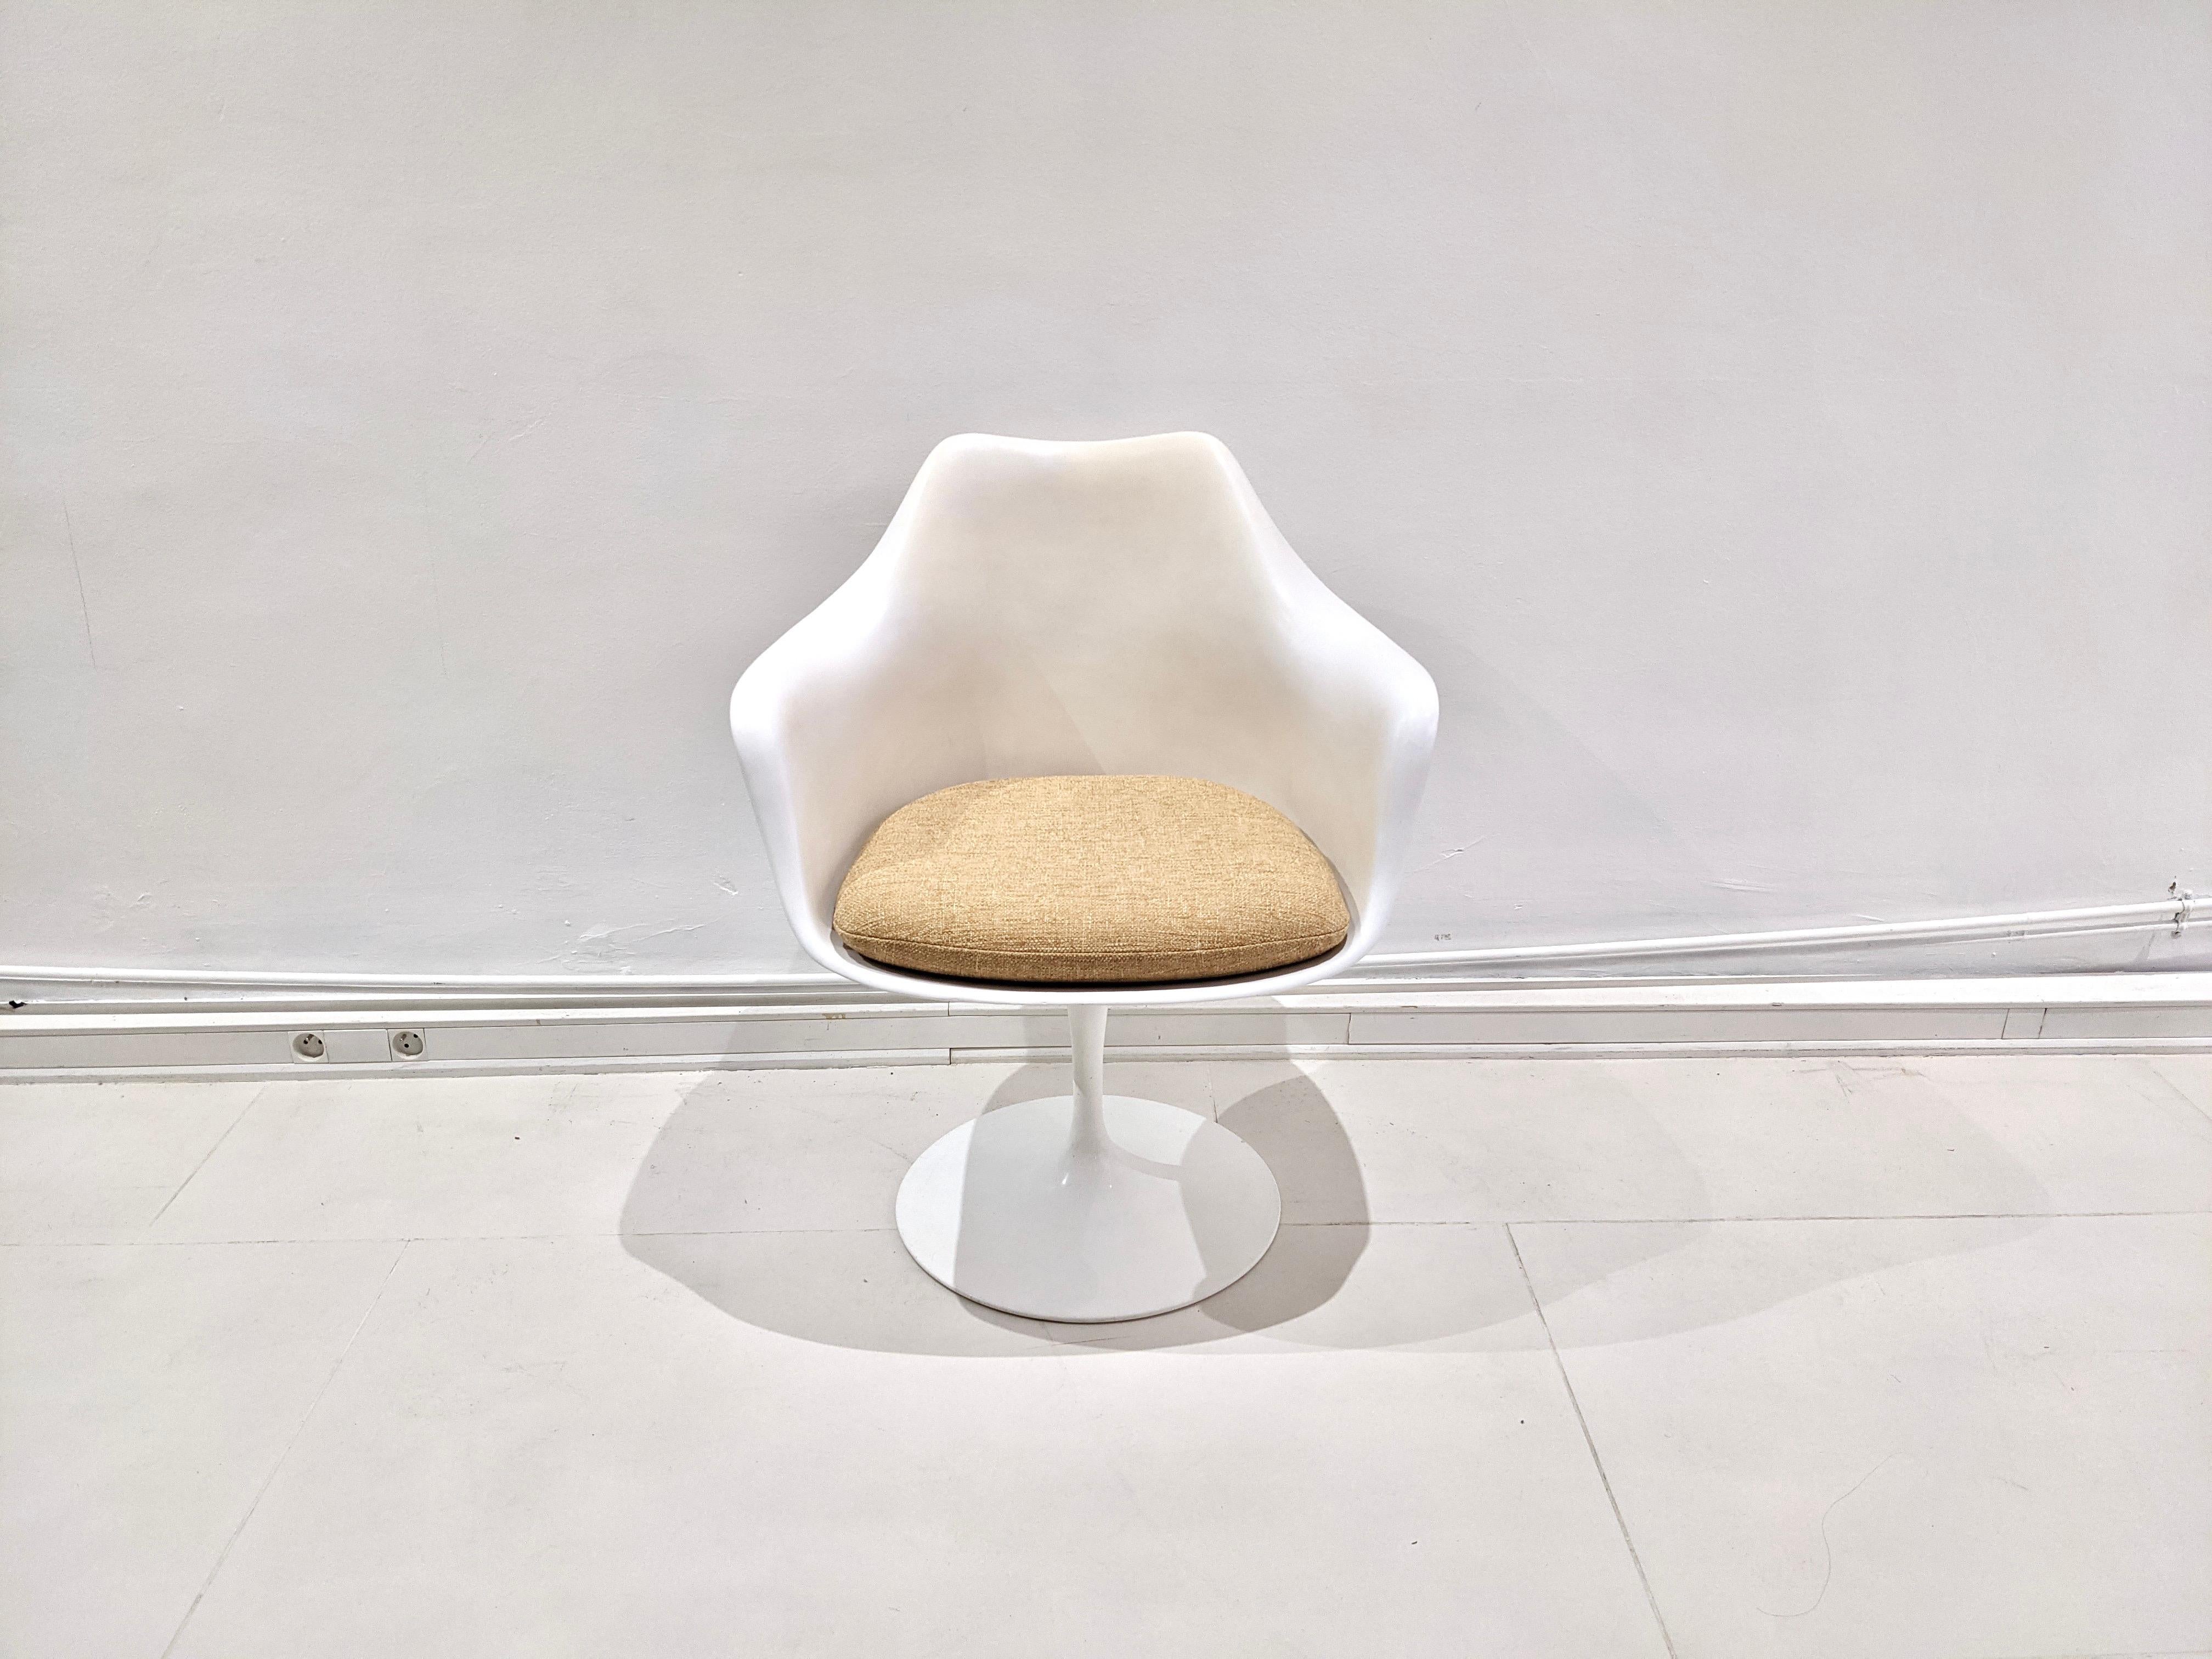 Tulip armchair by Eero Saarinen for Knoll. Fiberglass and cast aluminum. Cushion in fabric not original. Very good condition.